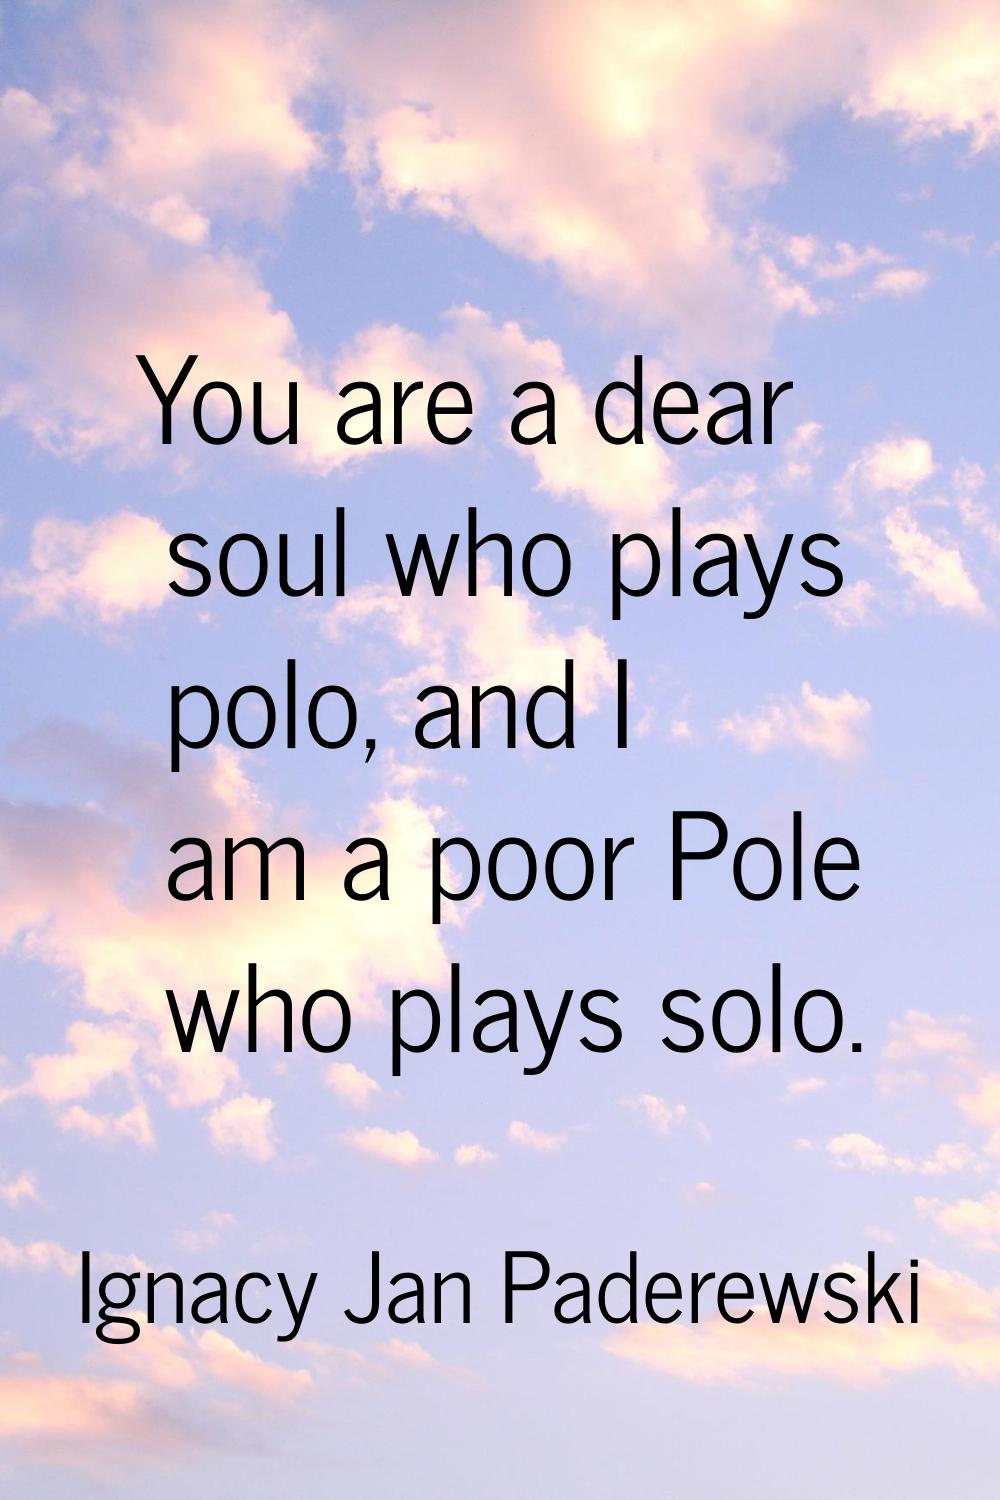 You are a dear soul who plays polo, and I am a poor Pole who plays solo.